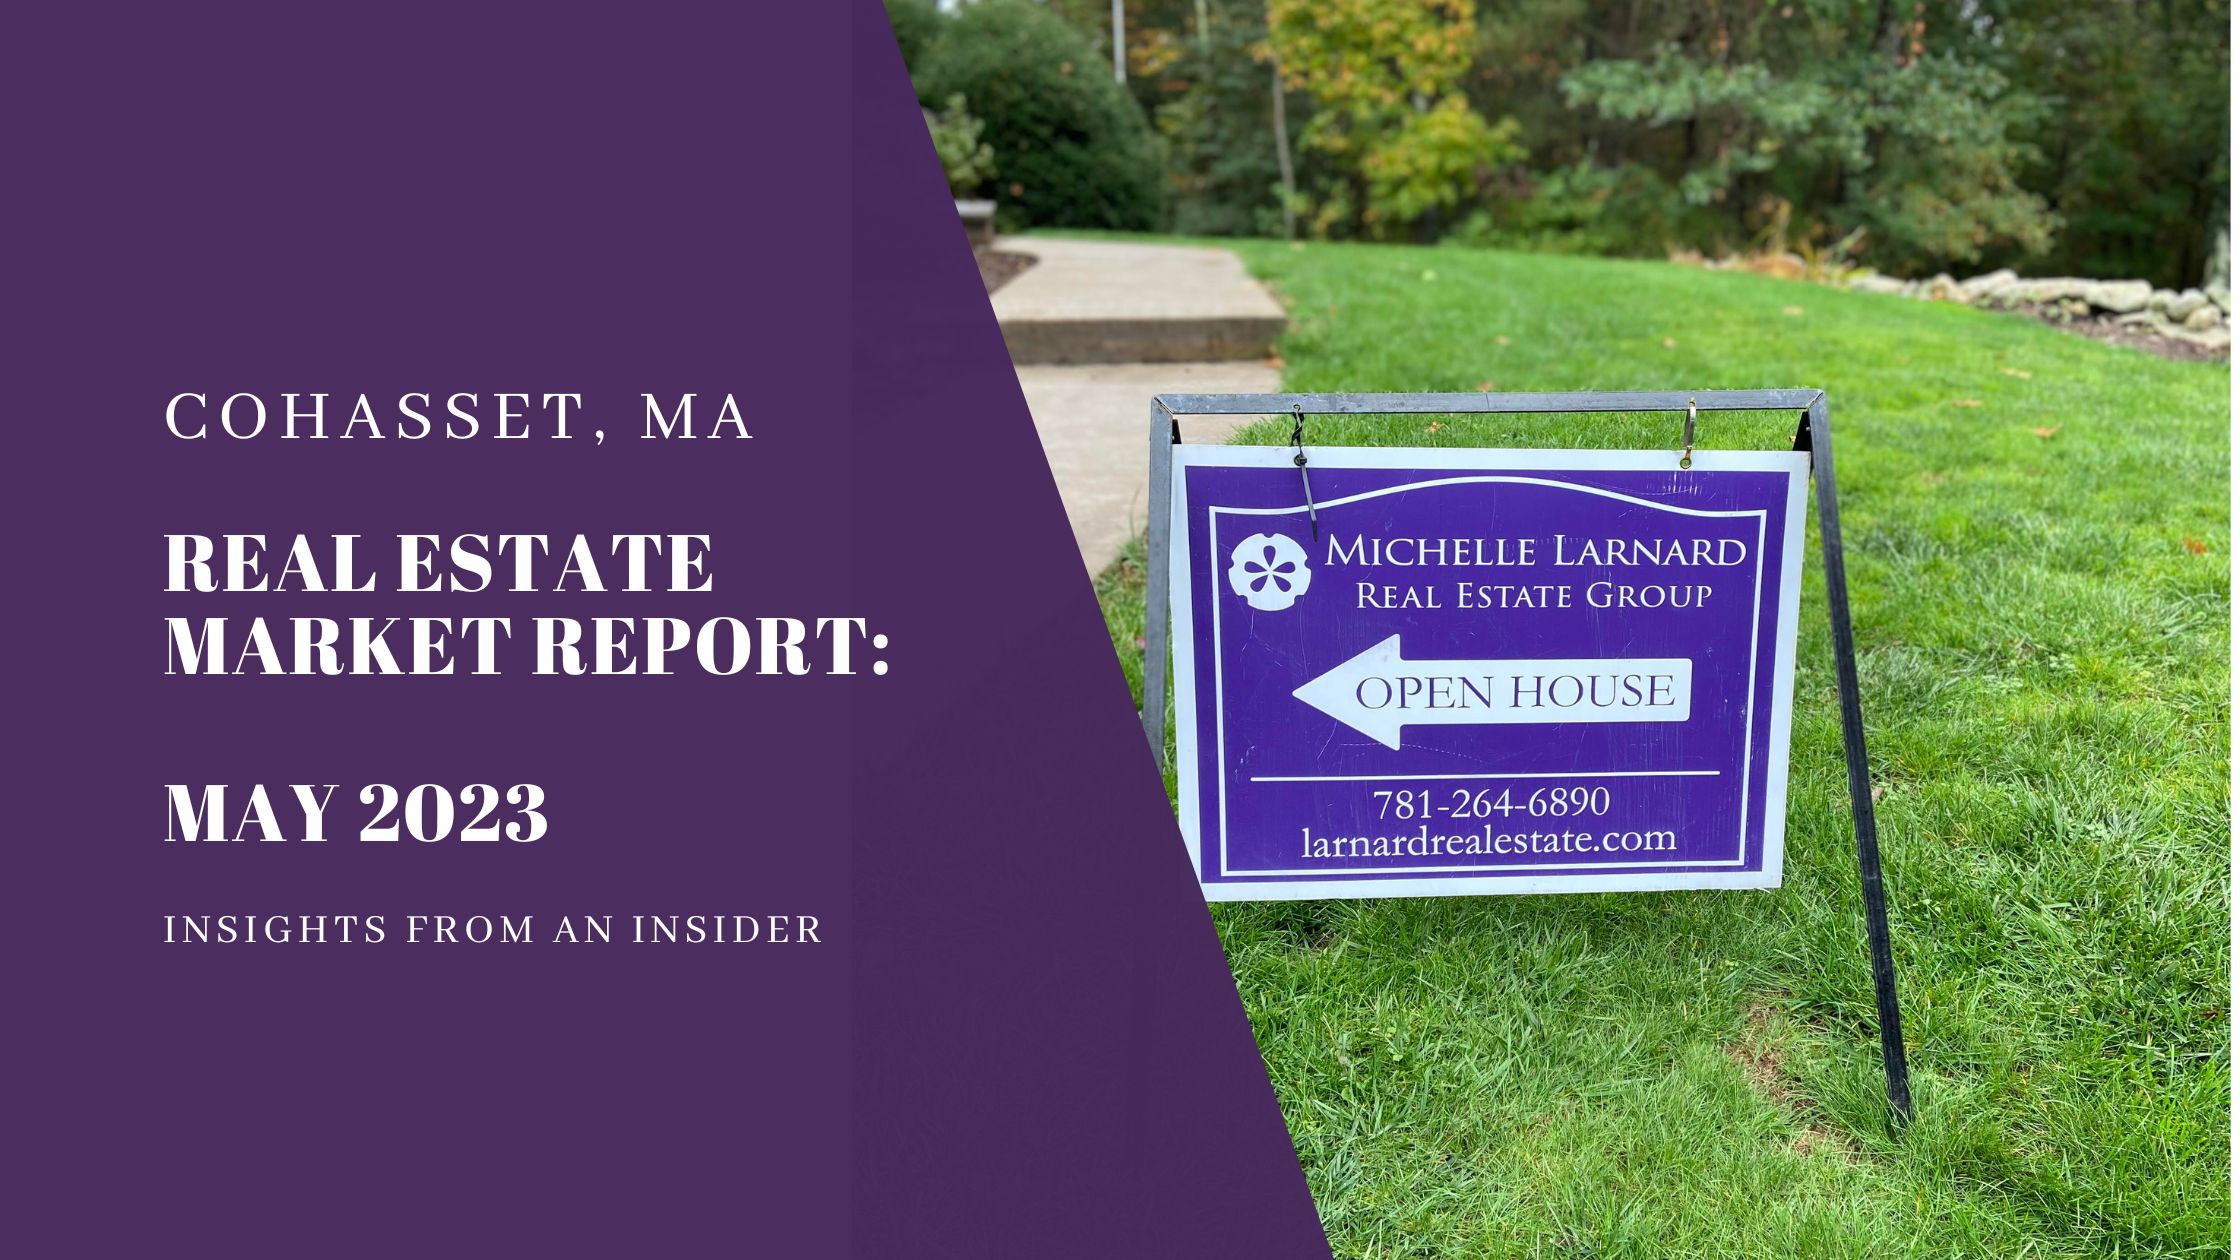 Real Estate Market Report for Cohasset, MA